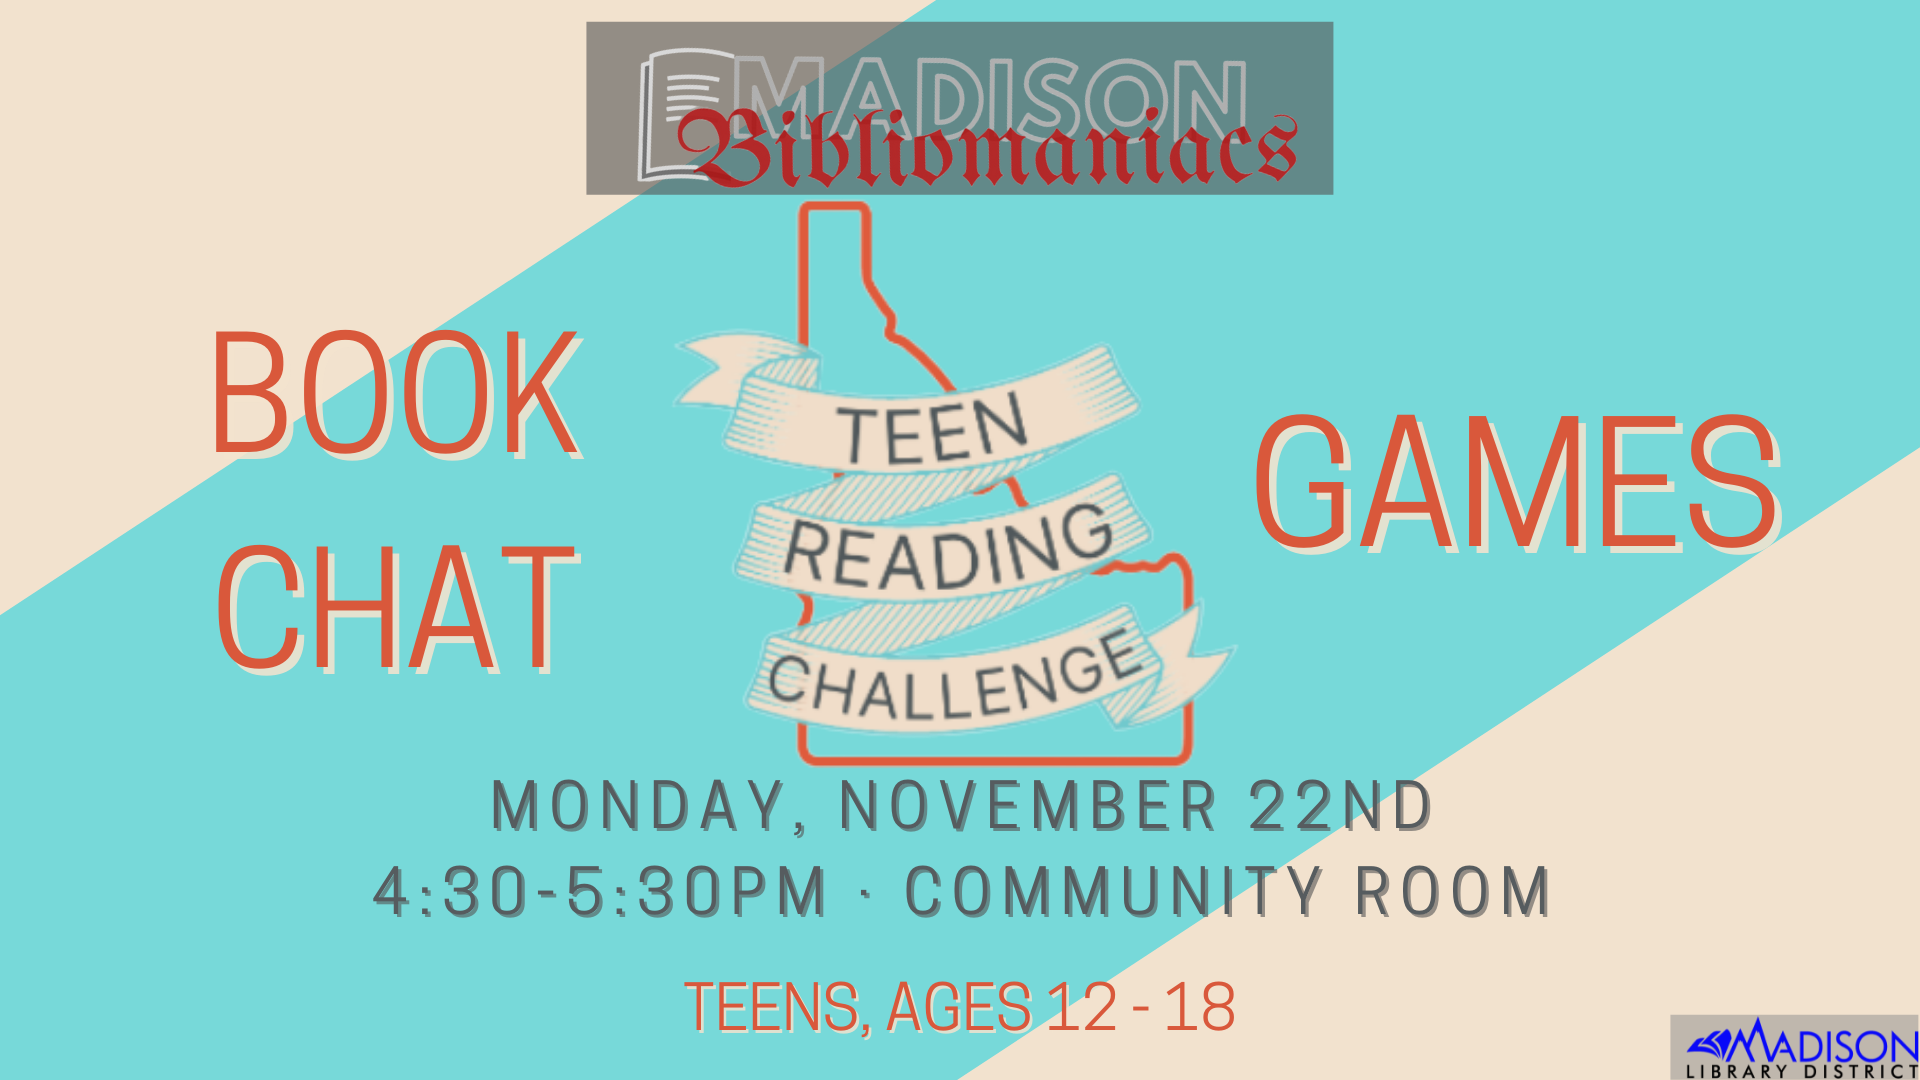 Teen action council have a say in what goes on at the library for teens